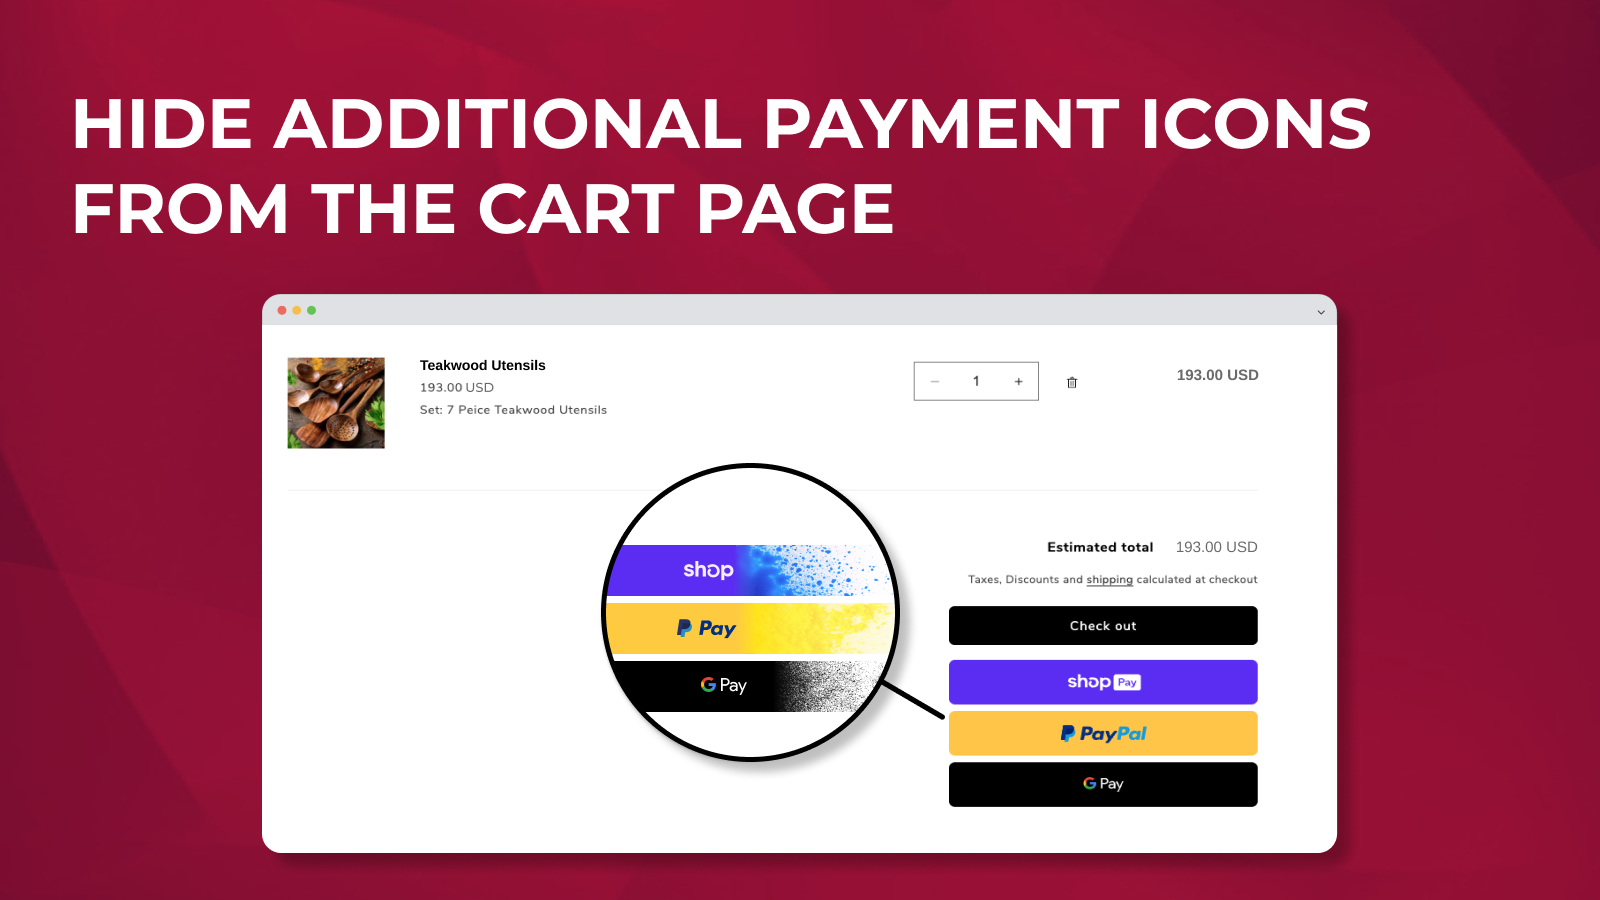 The hide PayPal & additional payment icons feature in the cart